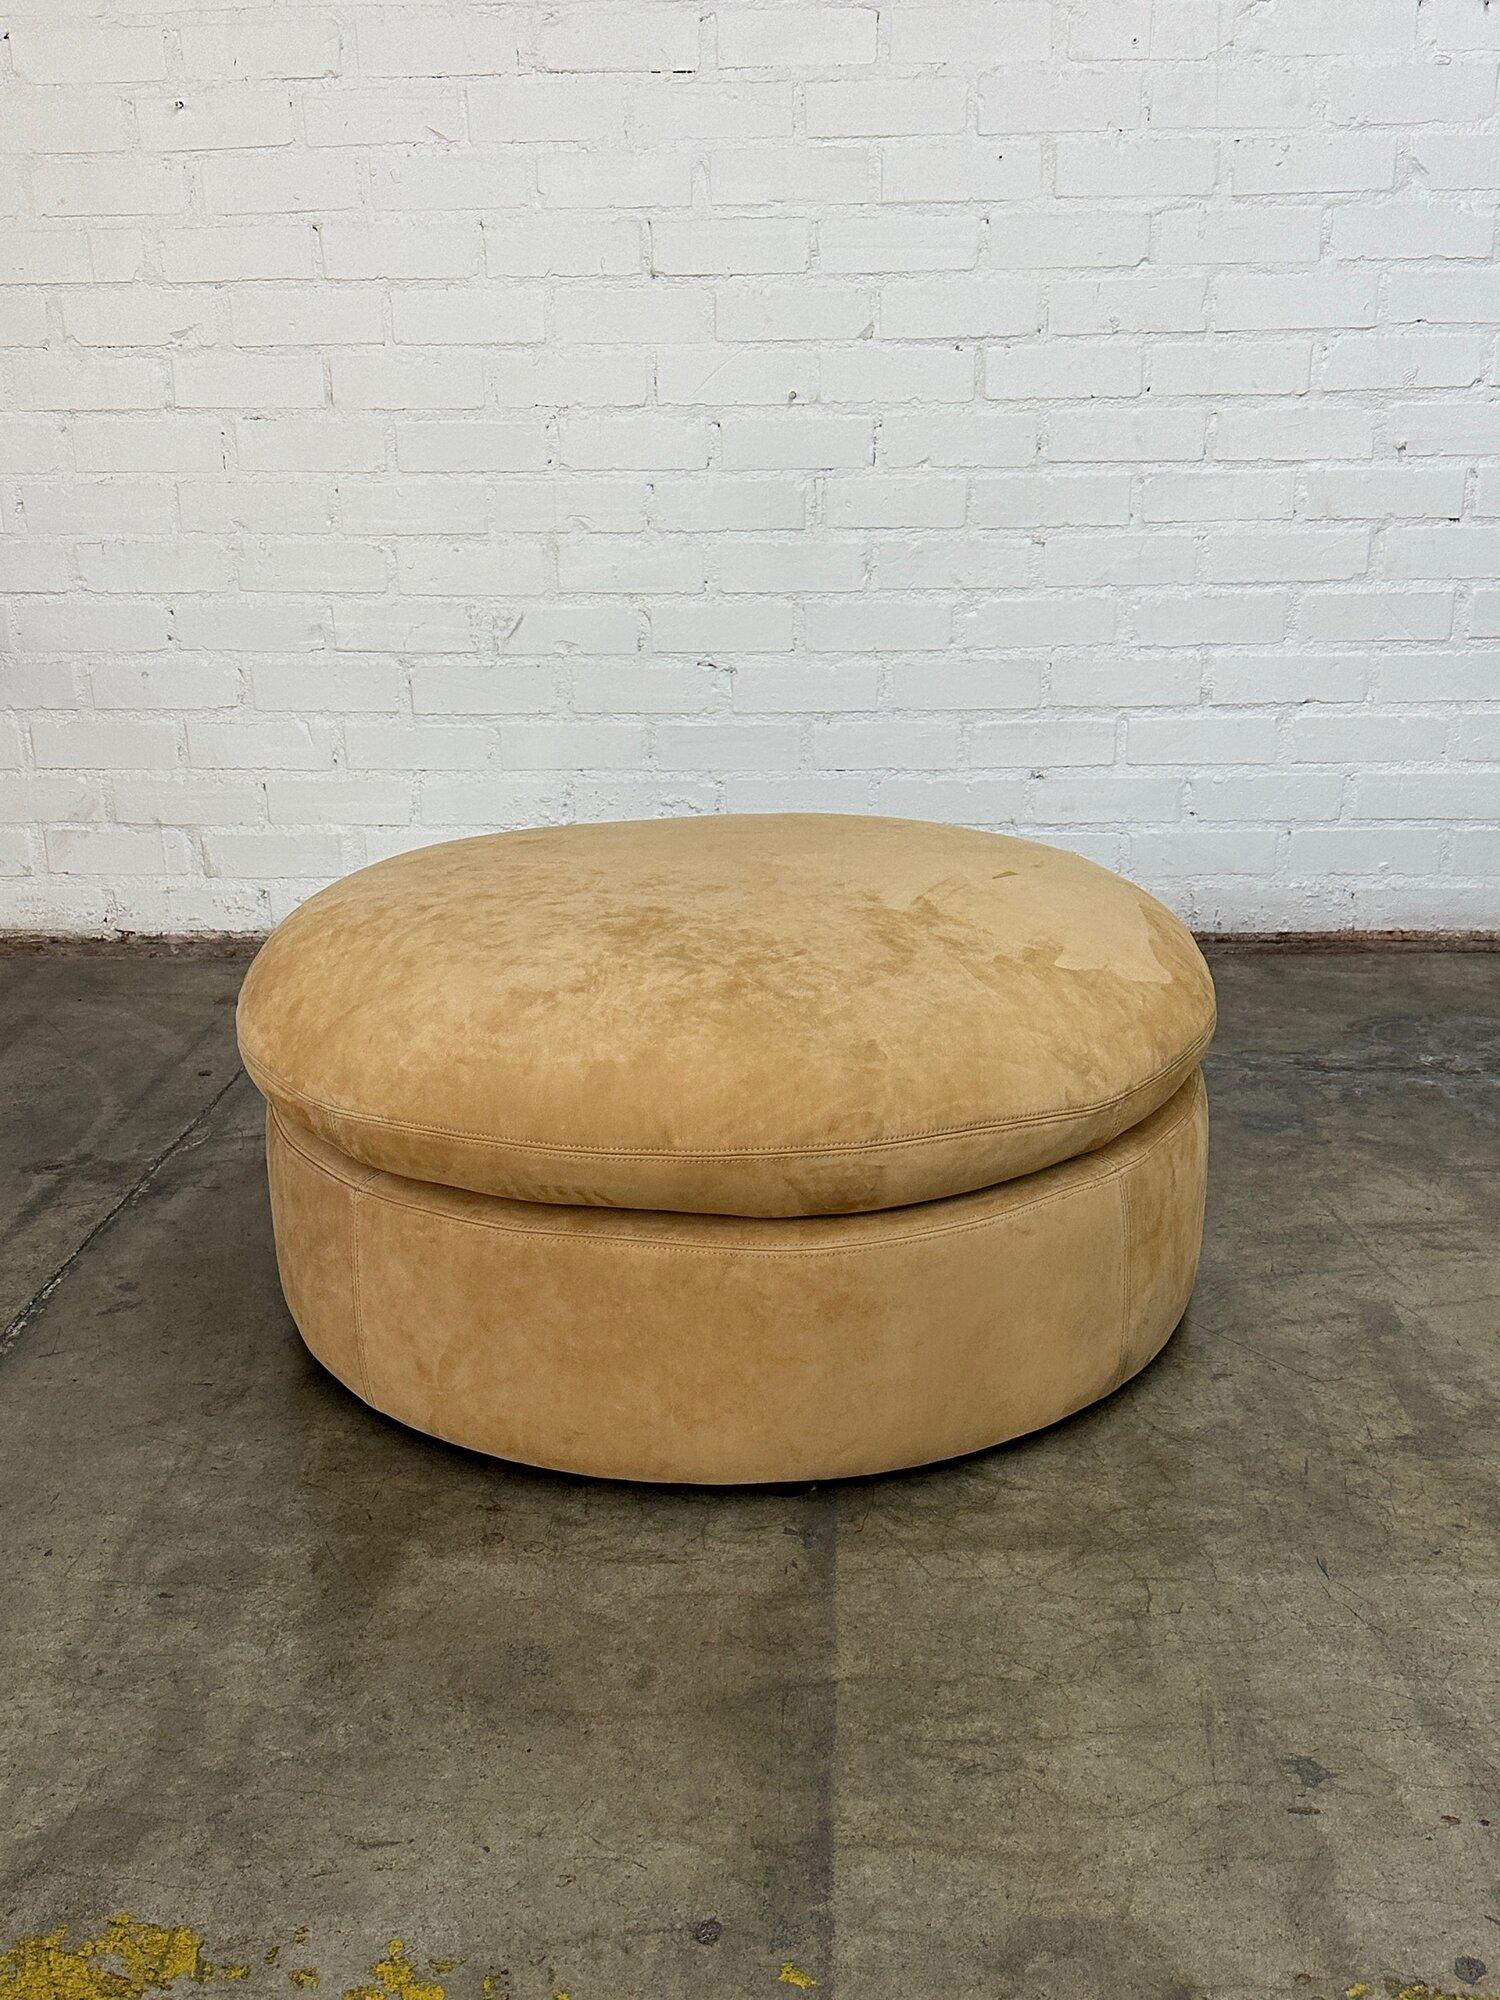 W44 D44 H20

This ottoman is made with sanded leather with a soft buttery smooth texture in a tan or sand color. There pillow top is leather down and fixed to the base. Legs are low profile chocolate drop legs. 